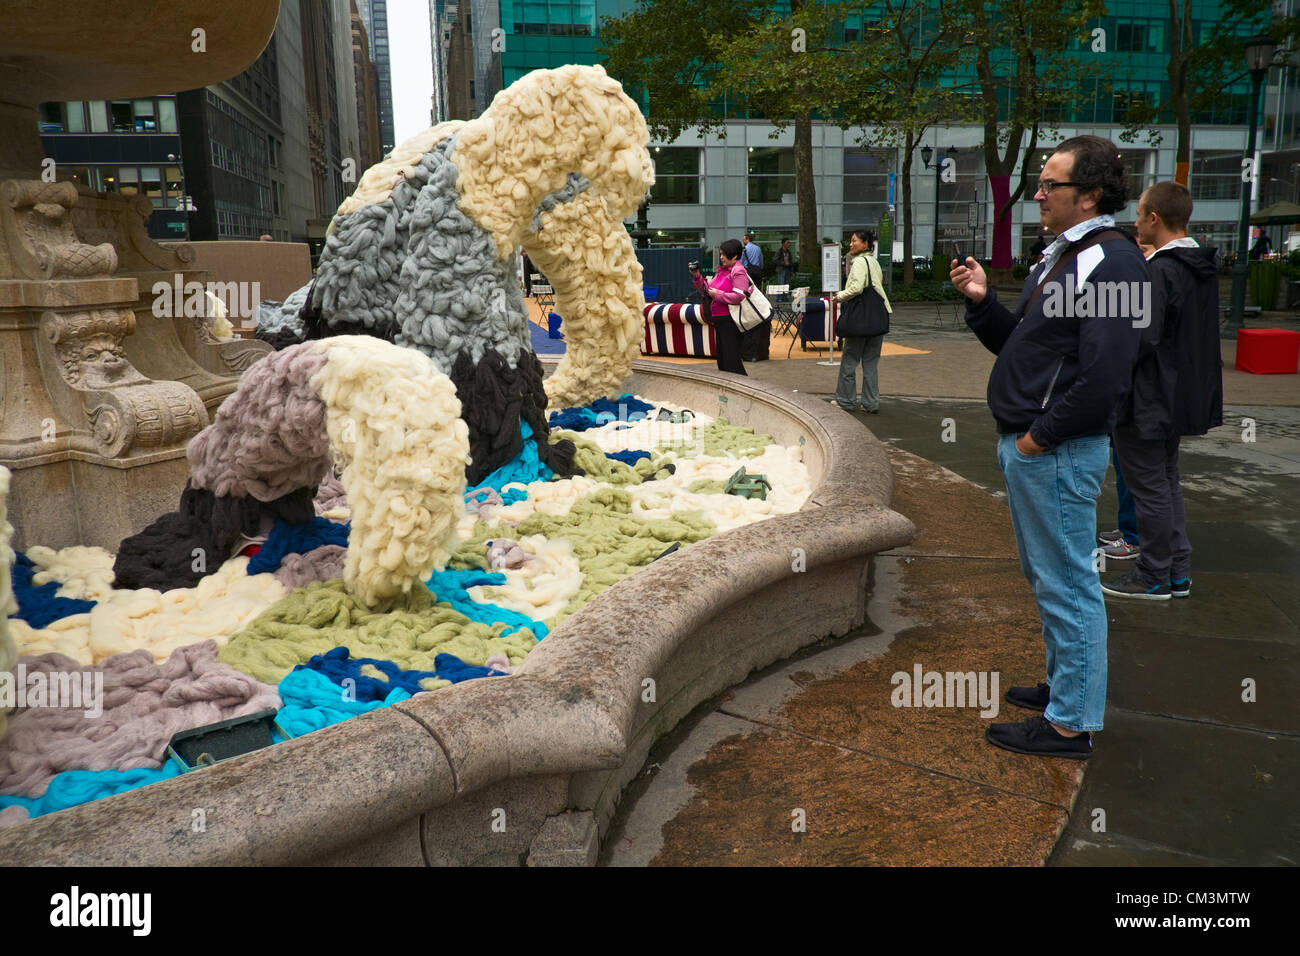 USA. September 27, 2012, New York, NY.  Wool replaces water in the fountain in New York's Bryant Park, as part of the Campaign for Wool's new US marketing effort.  Britain's Prince Charles is a sponsor of the Campaign for Wool. Stock Photo